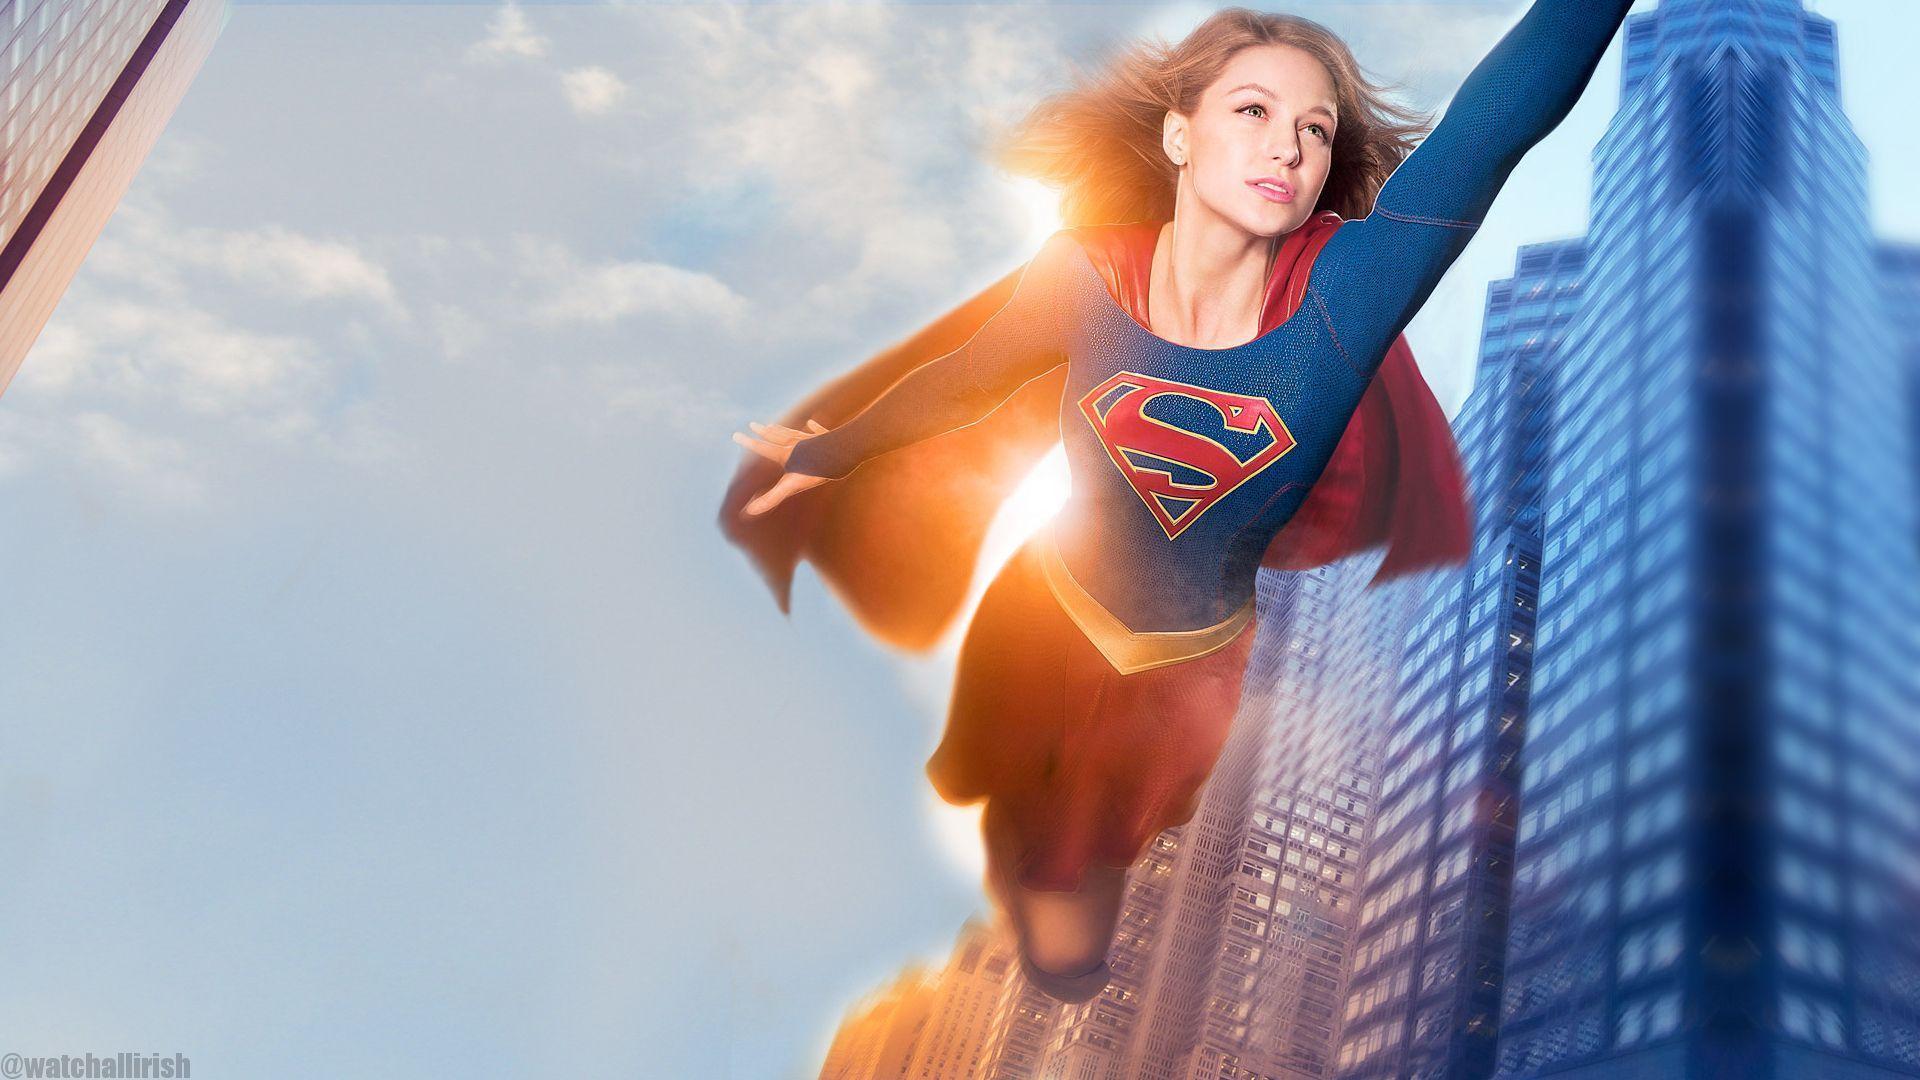 Supergirl TV Wallpaper High Resolution and Quality Download